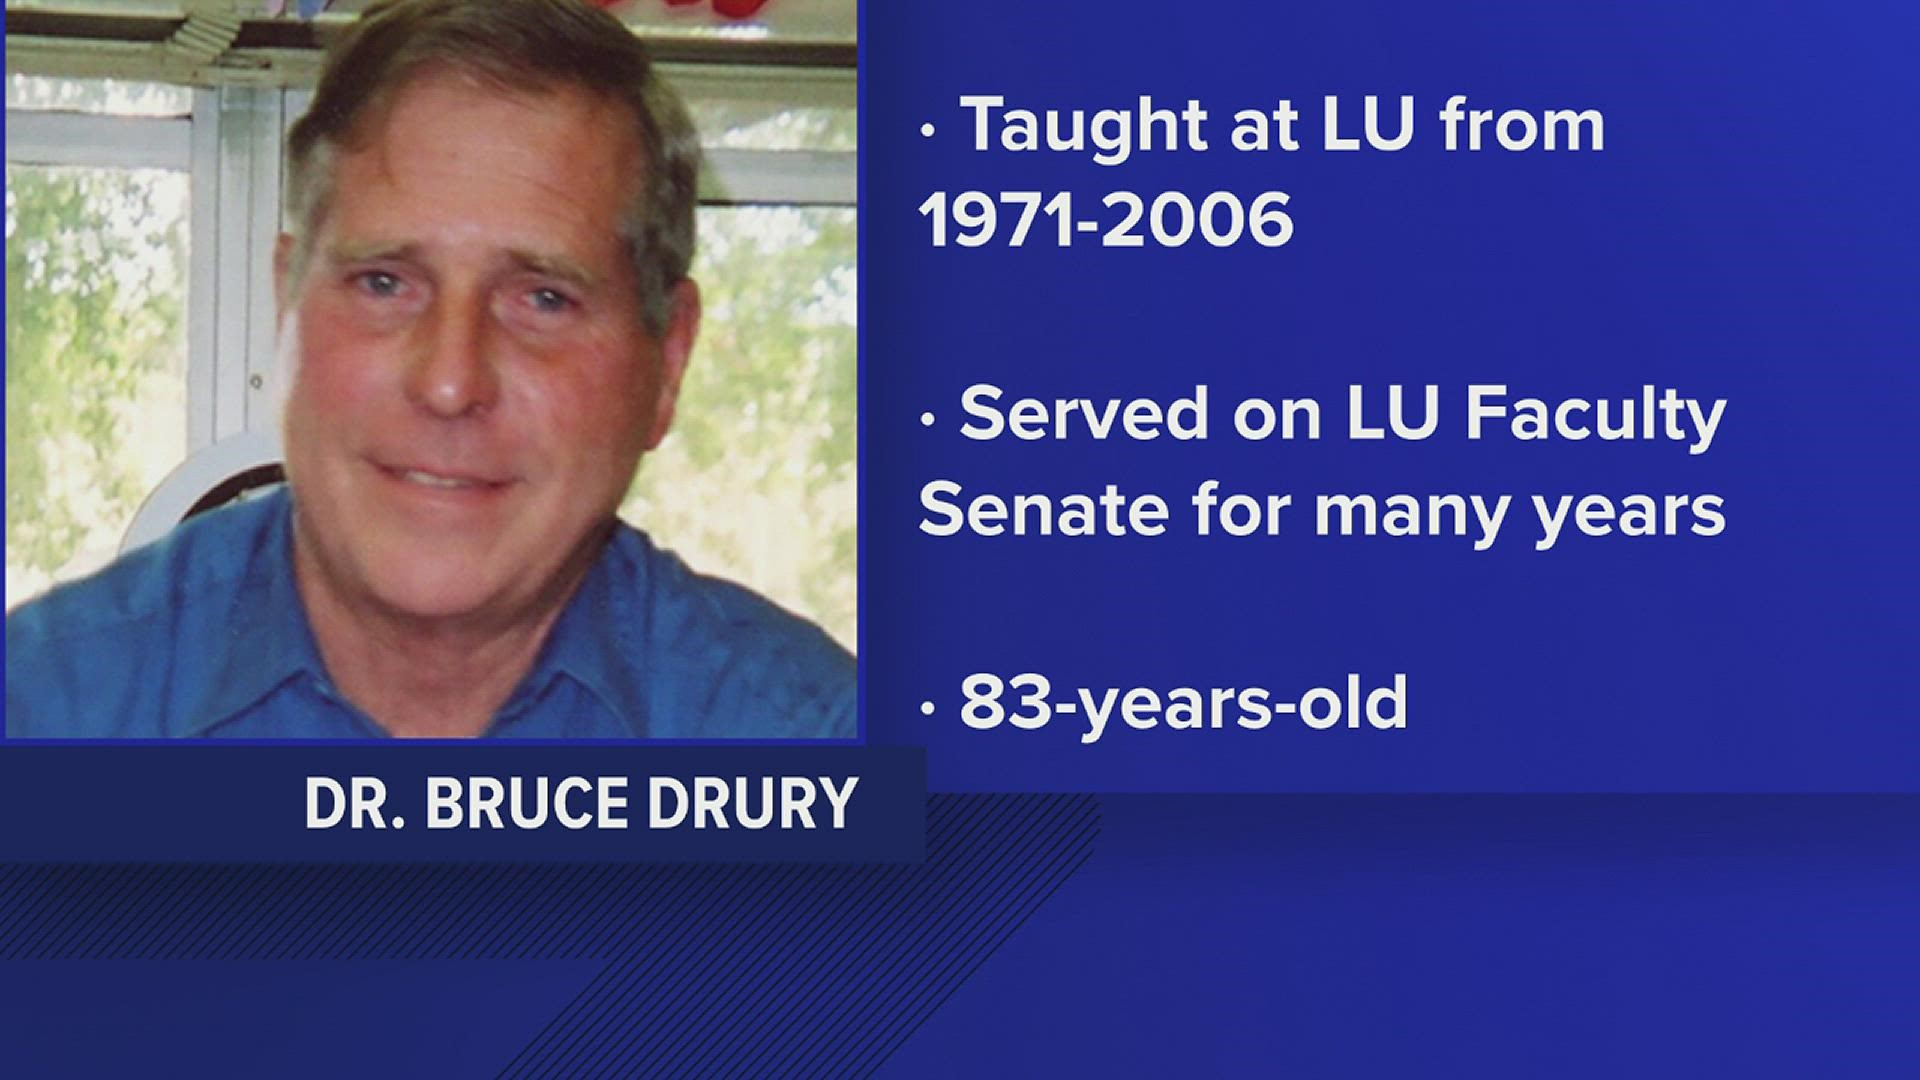 Drury taught in the Lamar University Department of Political Science from 1971 - 2006.